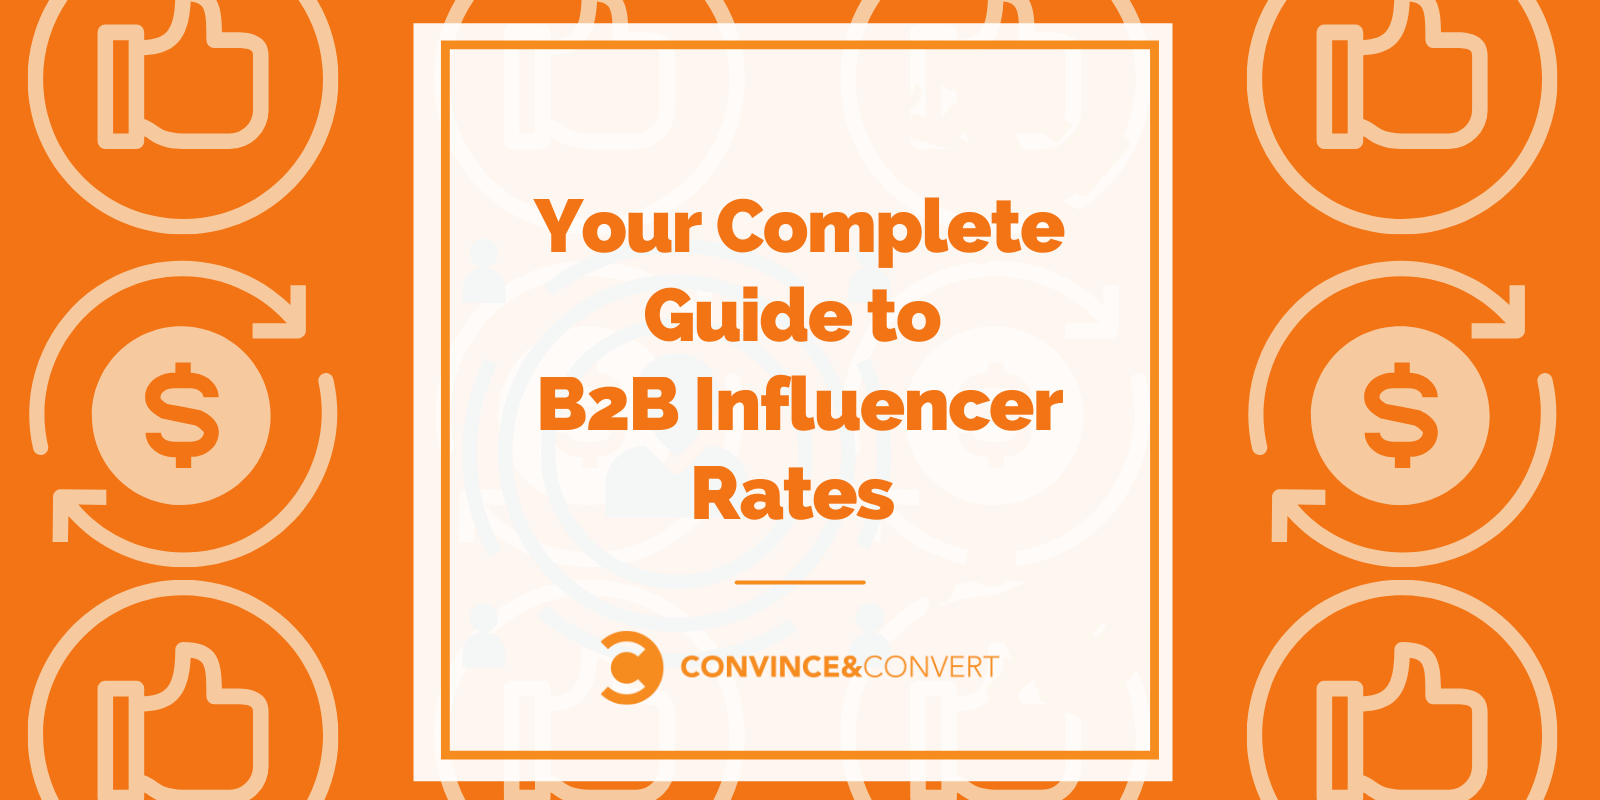 Your Complete Records to B2B Influencer Rates